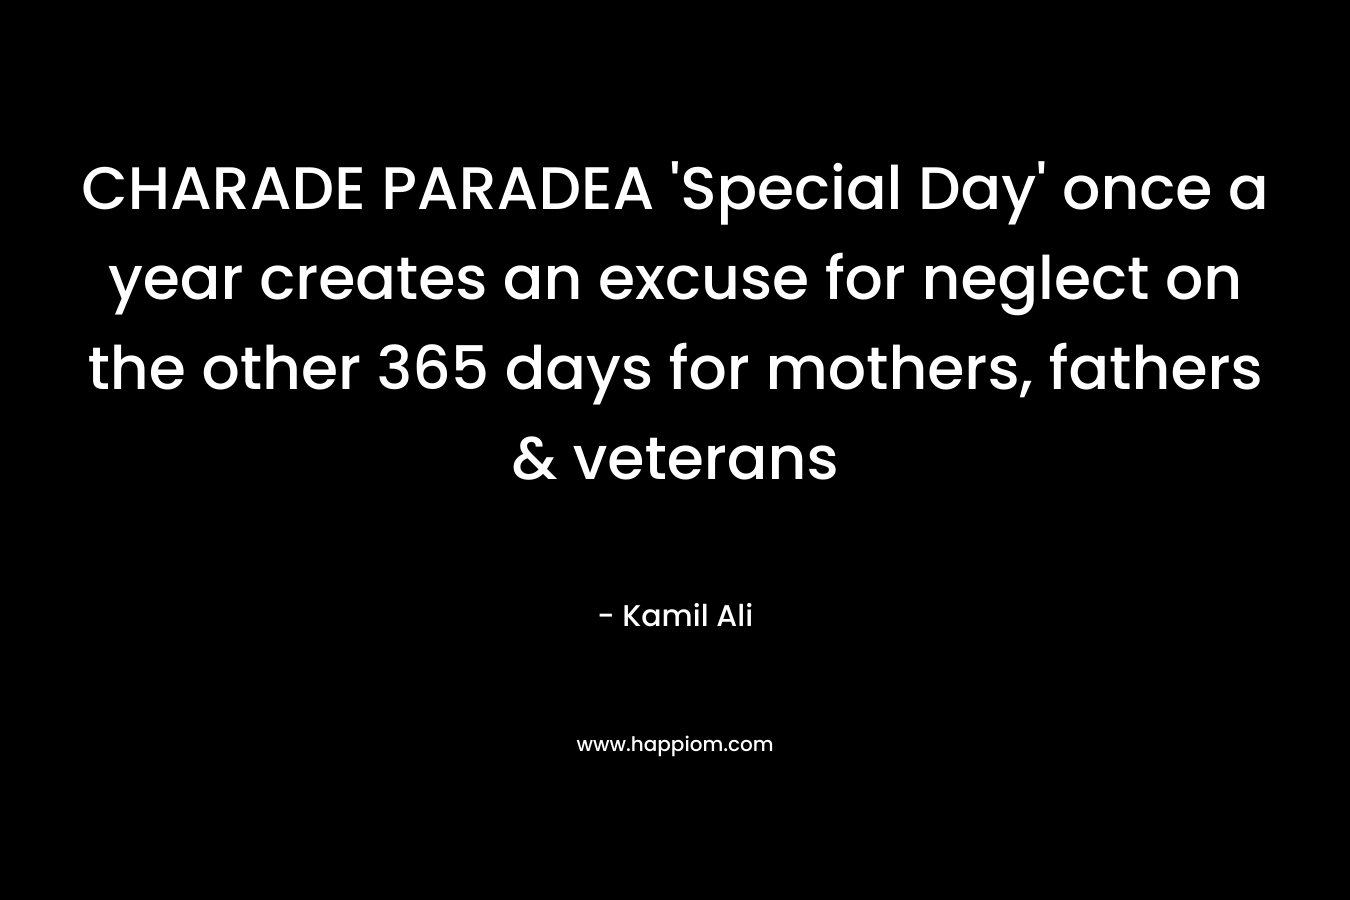 CHARADE PARADEA ‘Special Day’ once a year creates an excuse for neglect on the other 365 days for mothers, fathers & veterans – Kamil Ali